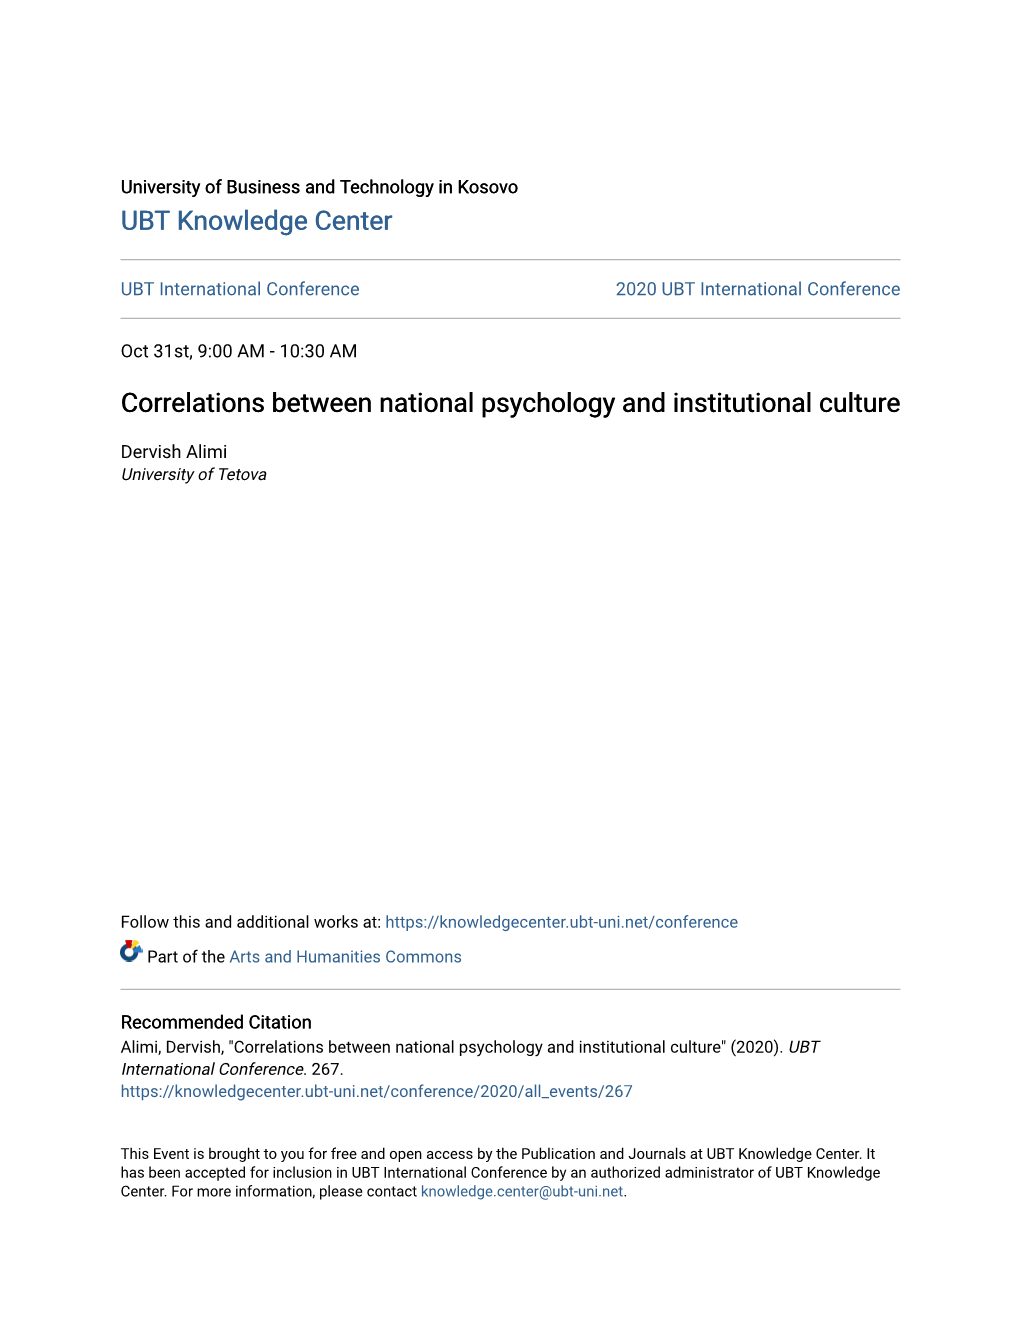 Correlations Between National Psychology and Institutional Culture